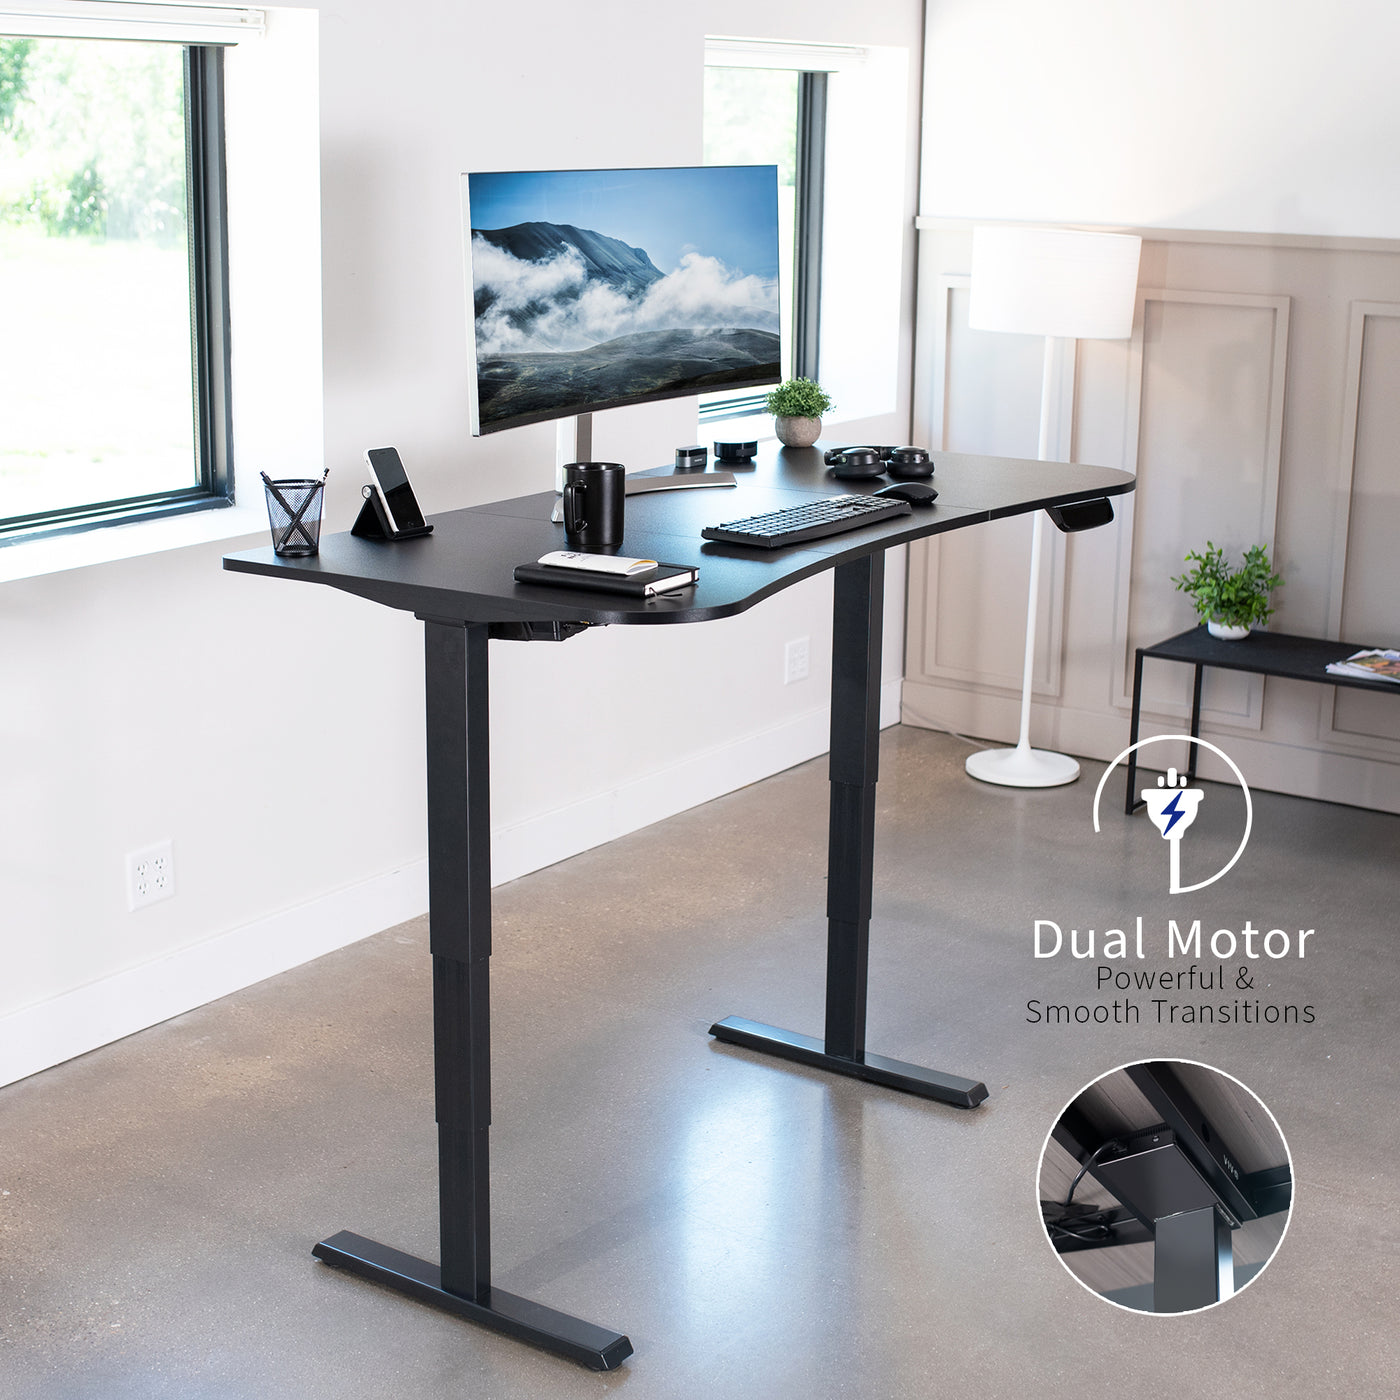 Ultra modern desk frame design with a powerful motor, collision detection, and sturdy leg support.